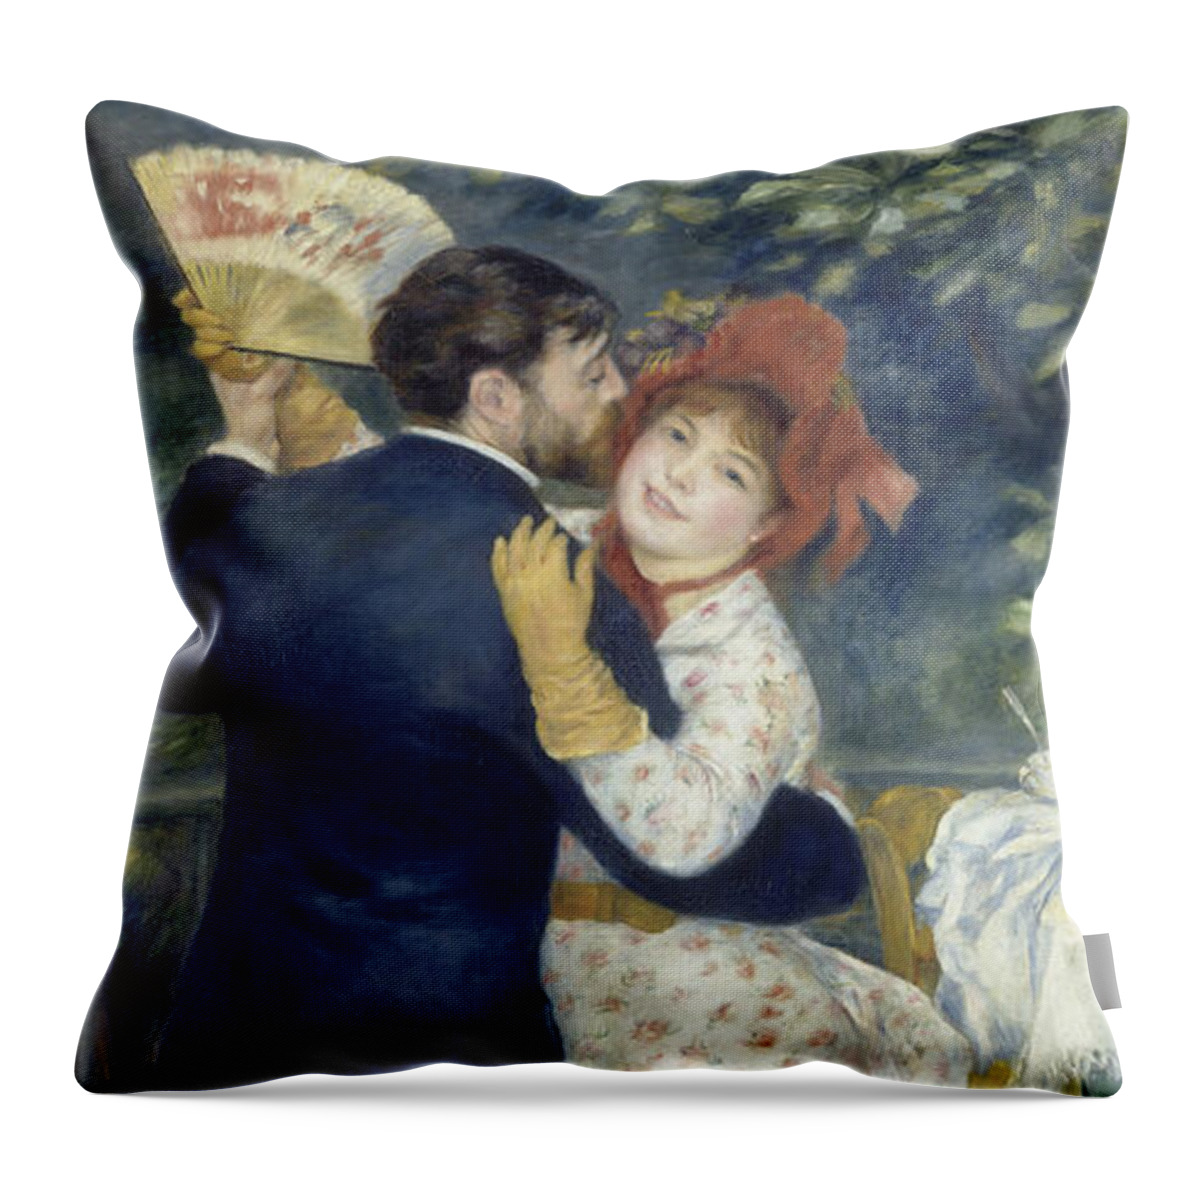 Renoir Throw Pillow featuring the painting Country Dance, from 1883 by Auguste Renoir